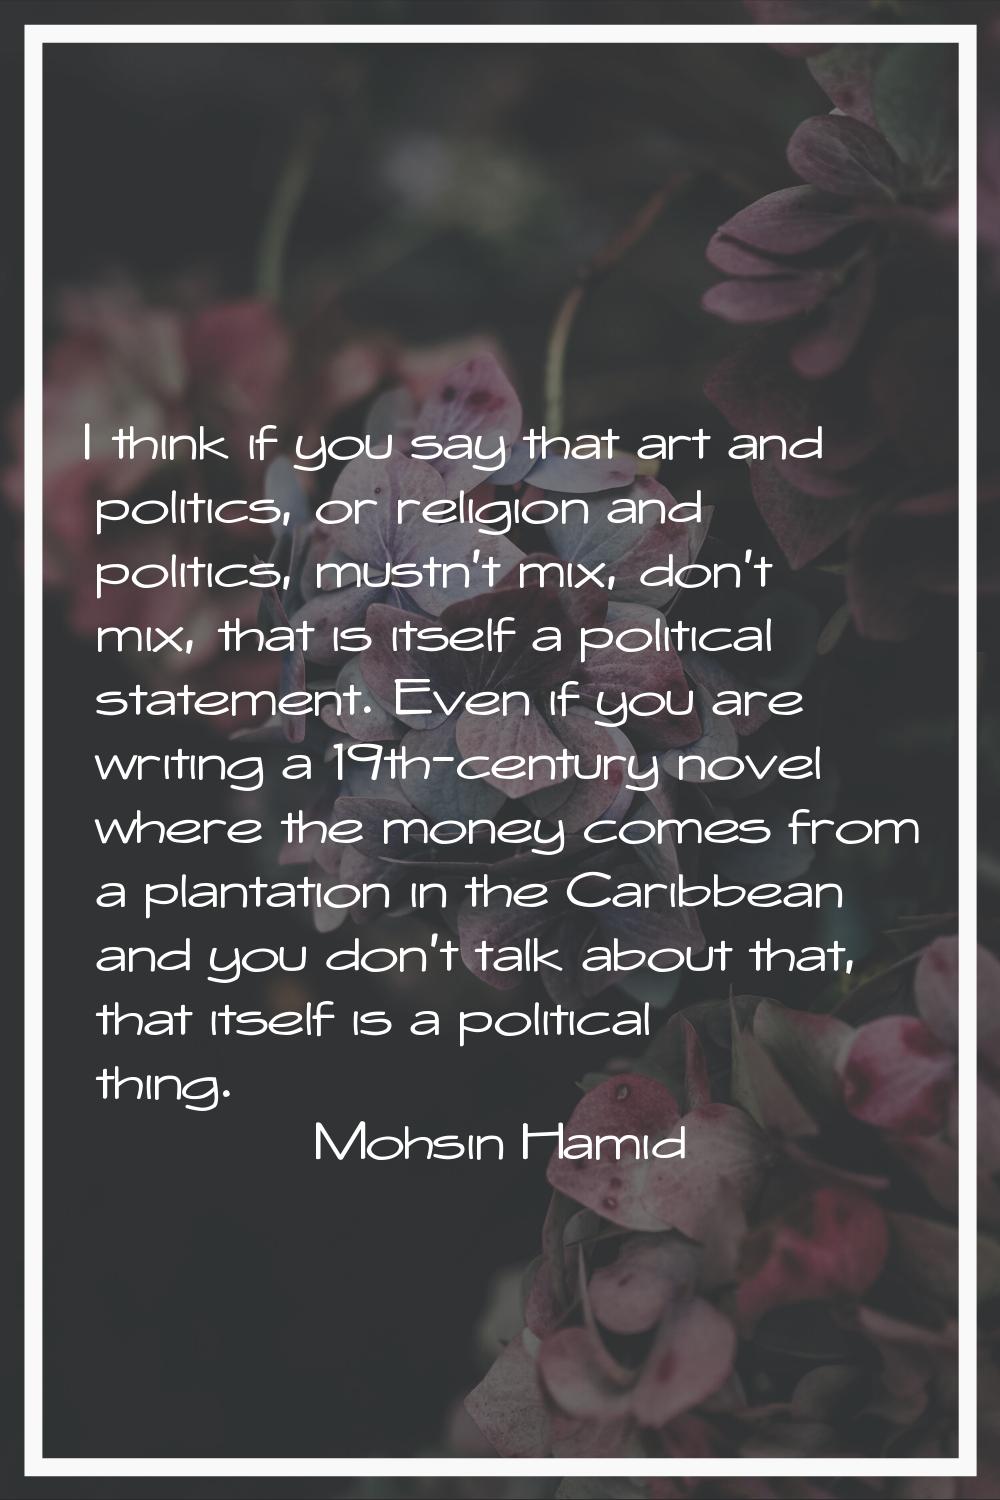 I think if you say that art and politics, or religion and politics, mustn't mix, don't mix, that is